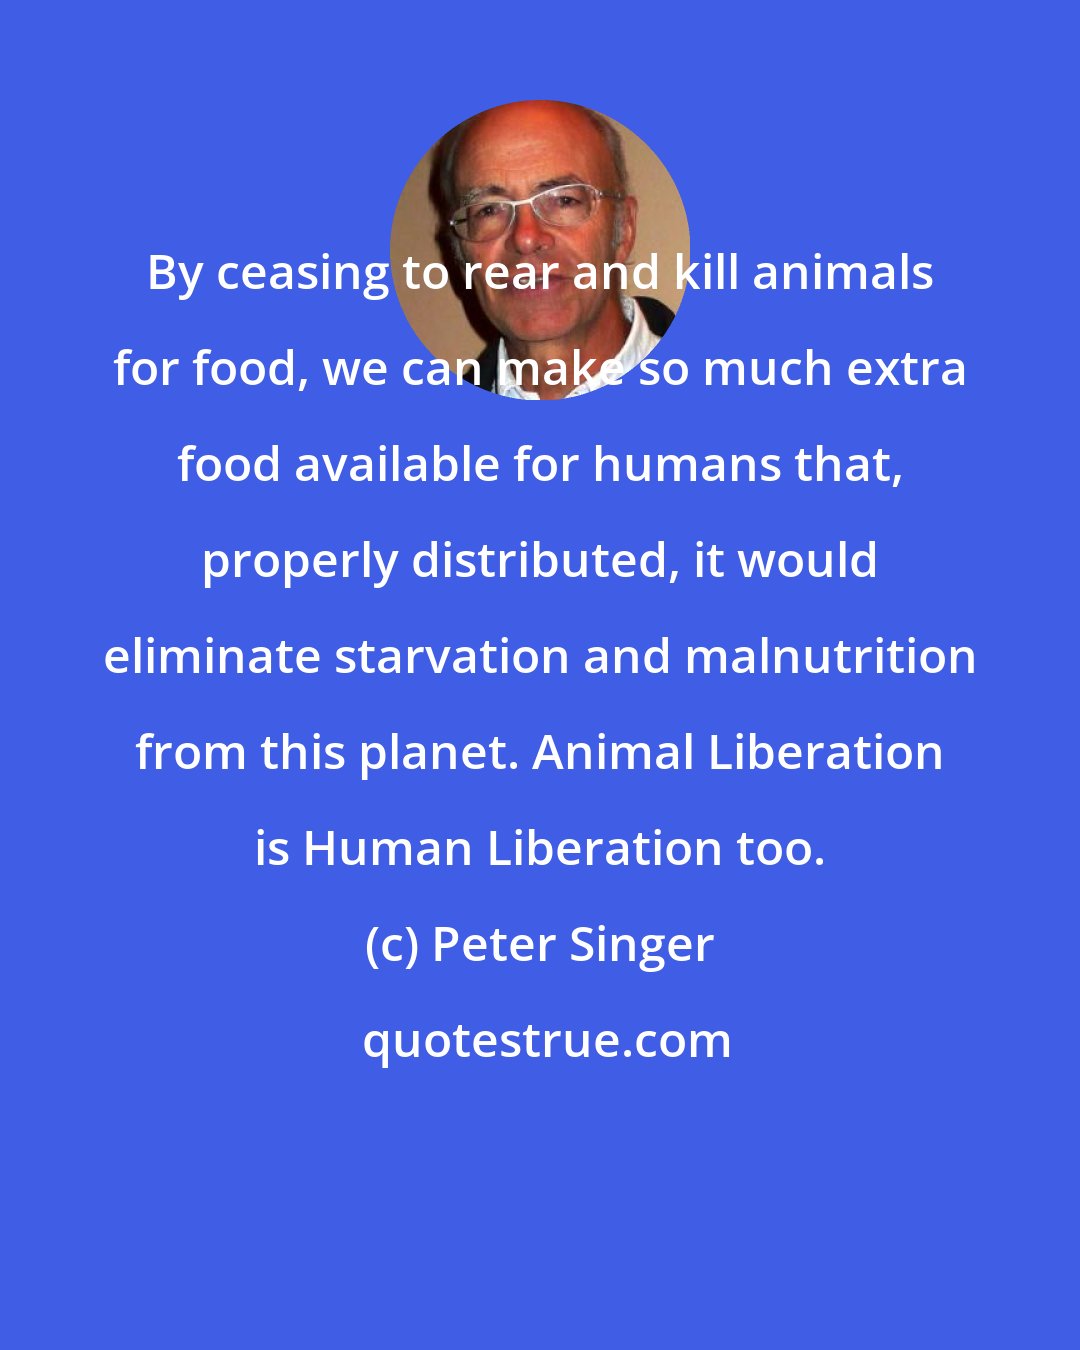 Peter Singer: By ceasing to rear and kill animals for food, we can make so much extra food available for humans that, properly distributed, it would eliminate starvation and malnutrition from this planet. Animal Liberation is Human Liberation too.